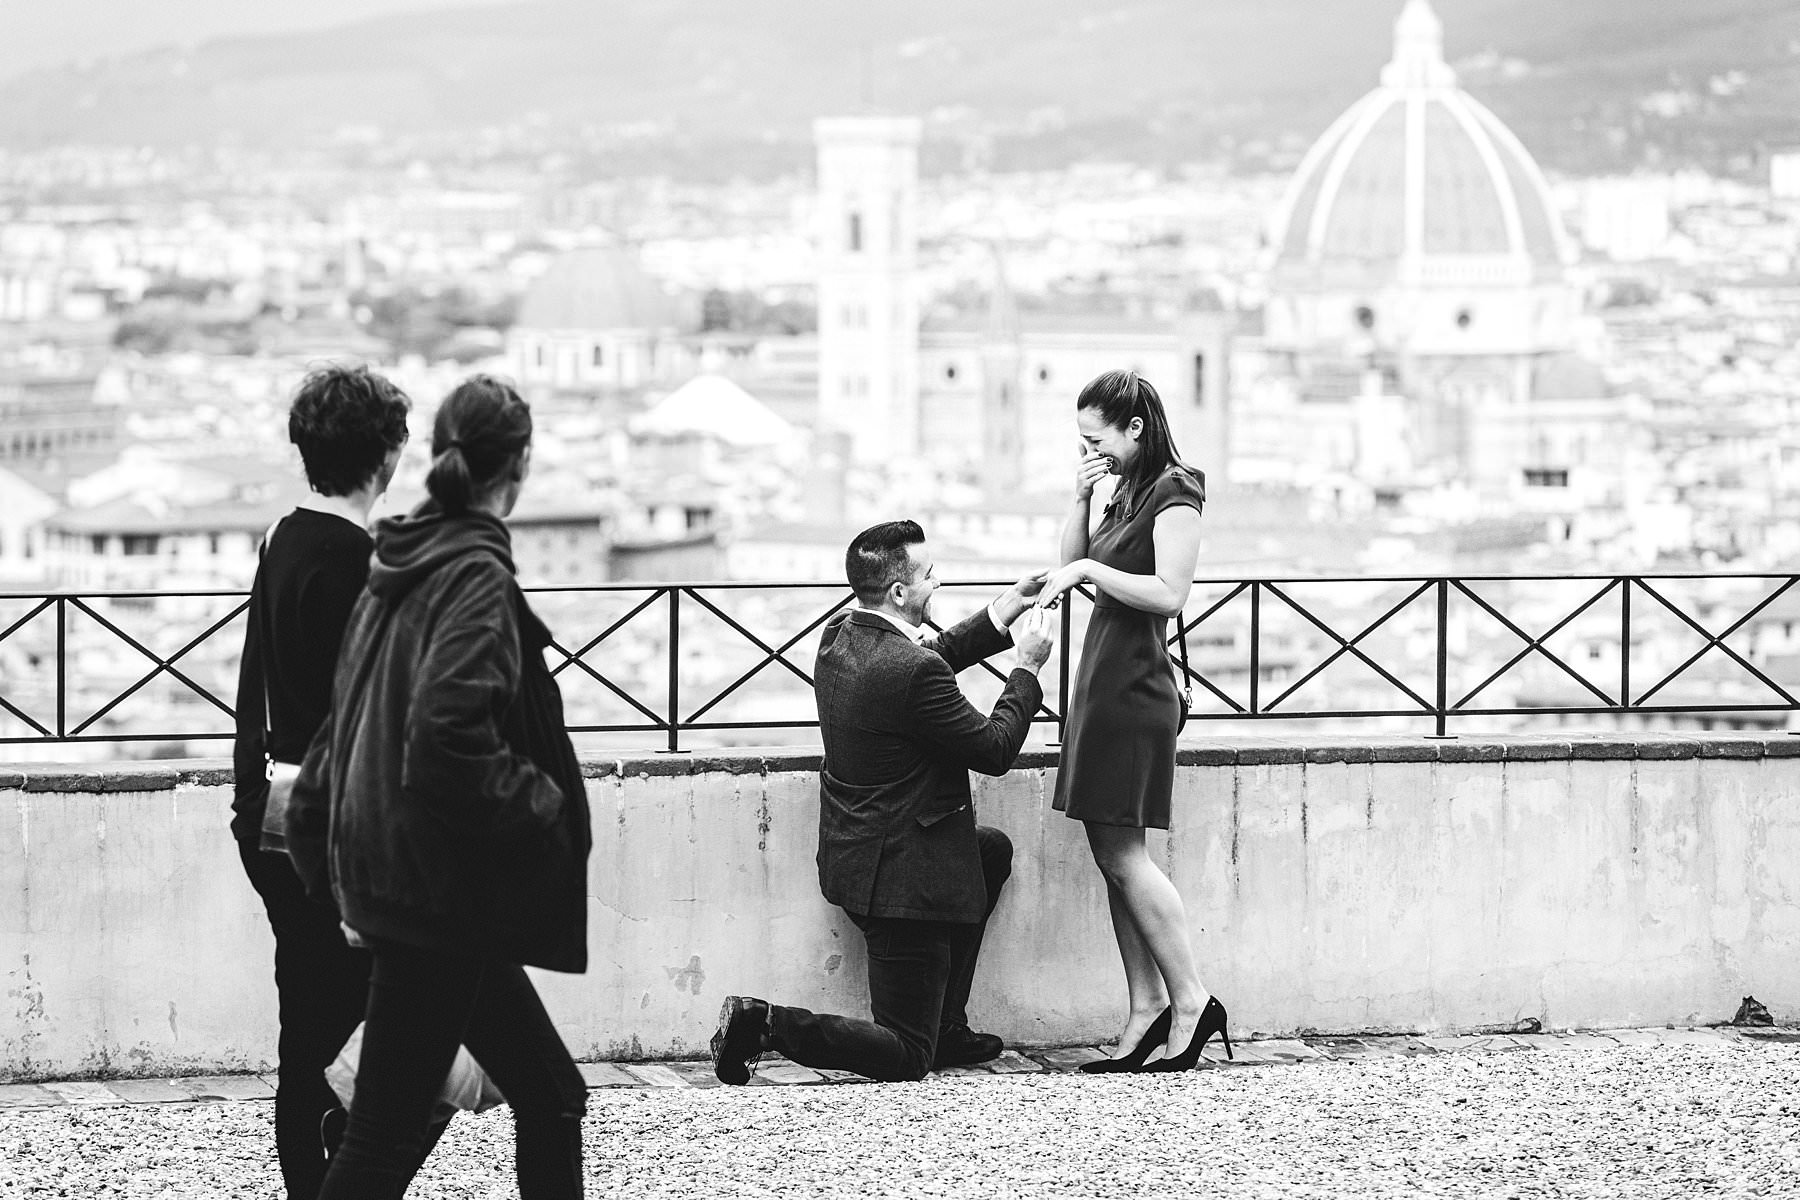 Cara and Vincent’s surprise proposal and photoshoot. Do you want your loved one to say “Yes”? Then a surprise proposal photoshoot is what you need, especially in a romantic and charming location like Florence!